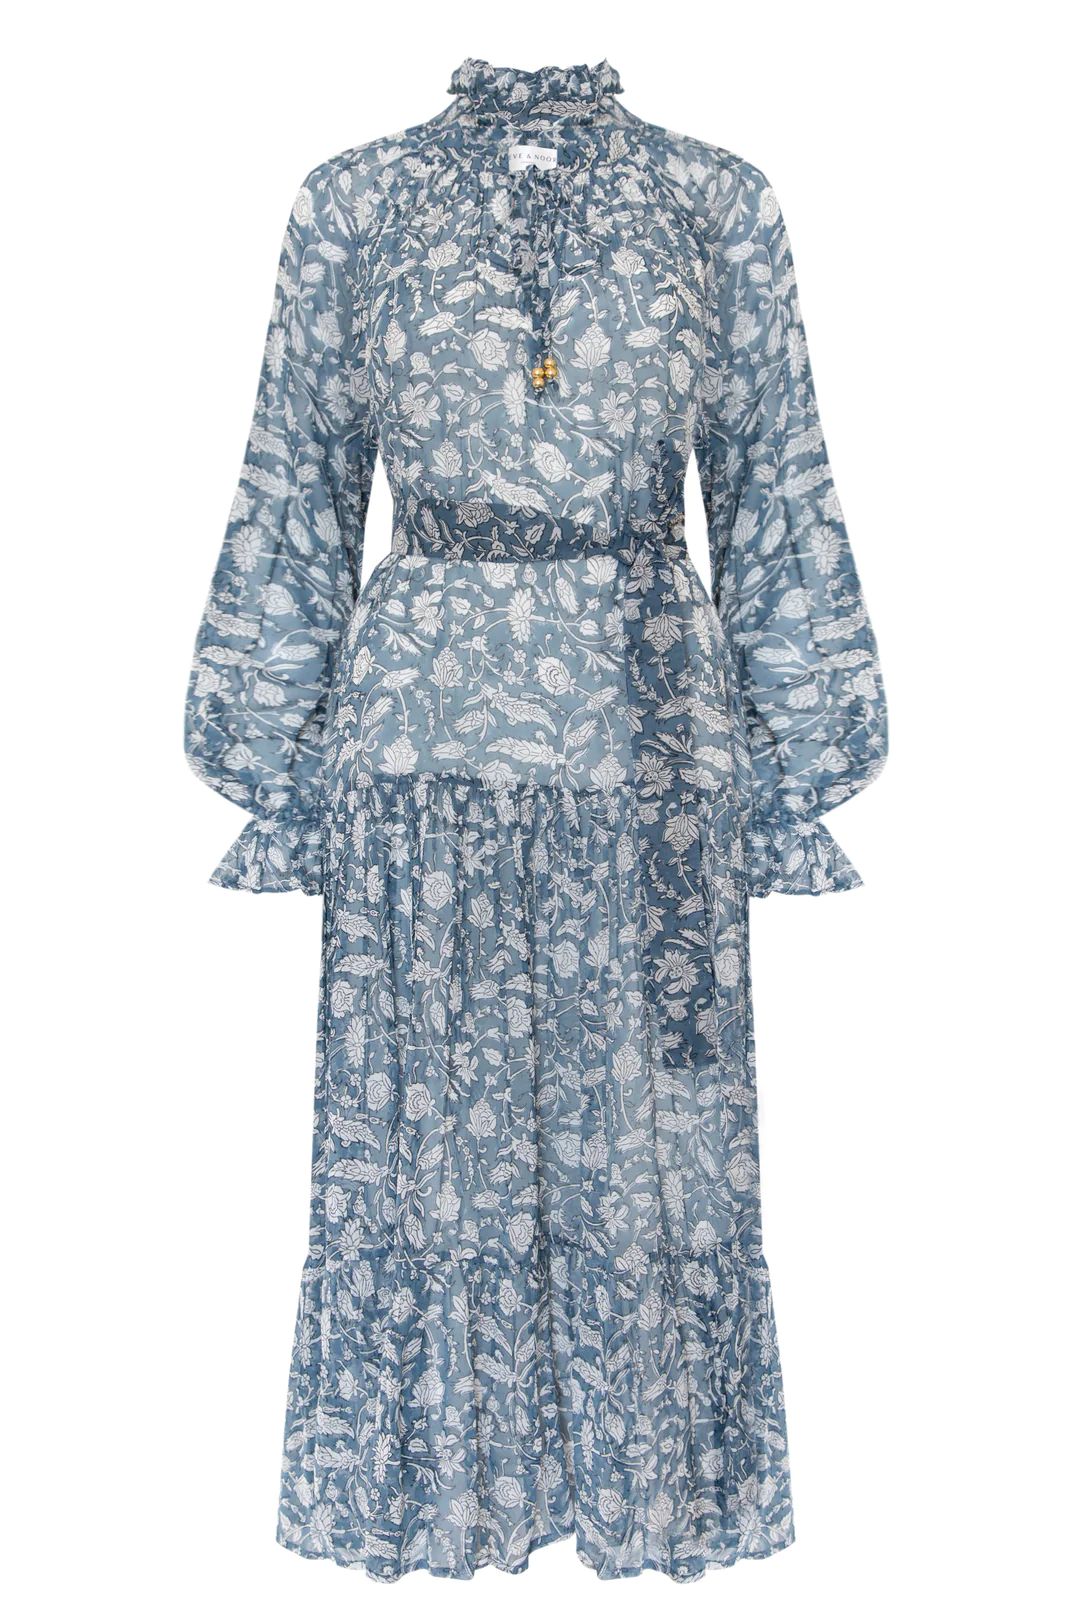 Tilly Dress in Sky Leaves | Neve and Noor